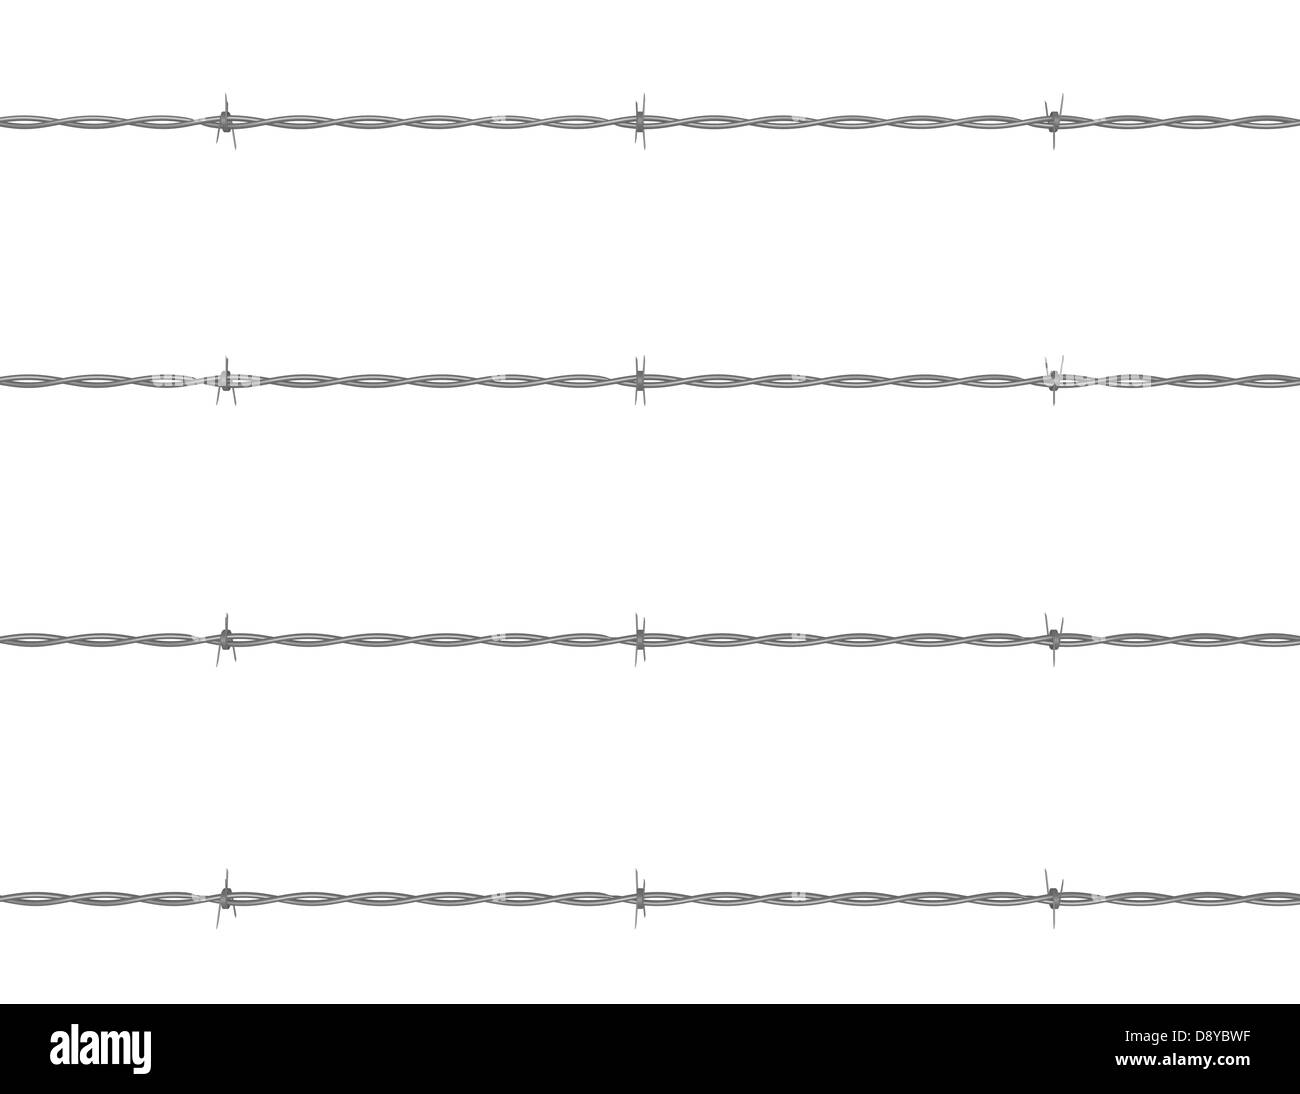 3d Render of a Barbed Wire Fence Stock Photo